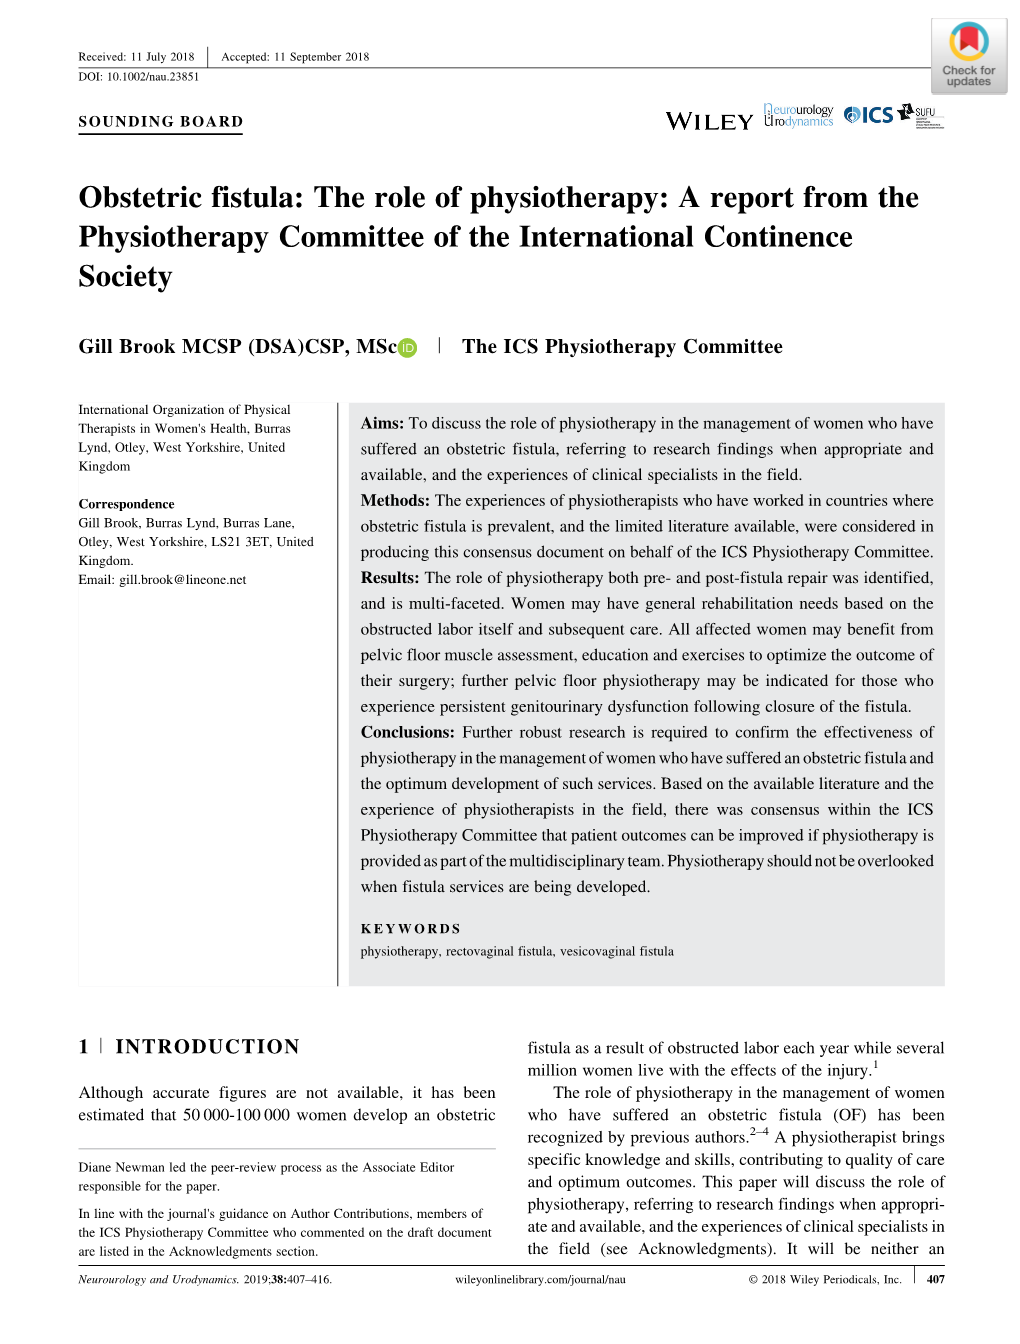 Obstetric Fistula: the Role of Physiotherapy: a Report from the Physiotherapy Committee of the International Continence Society